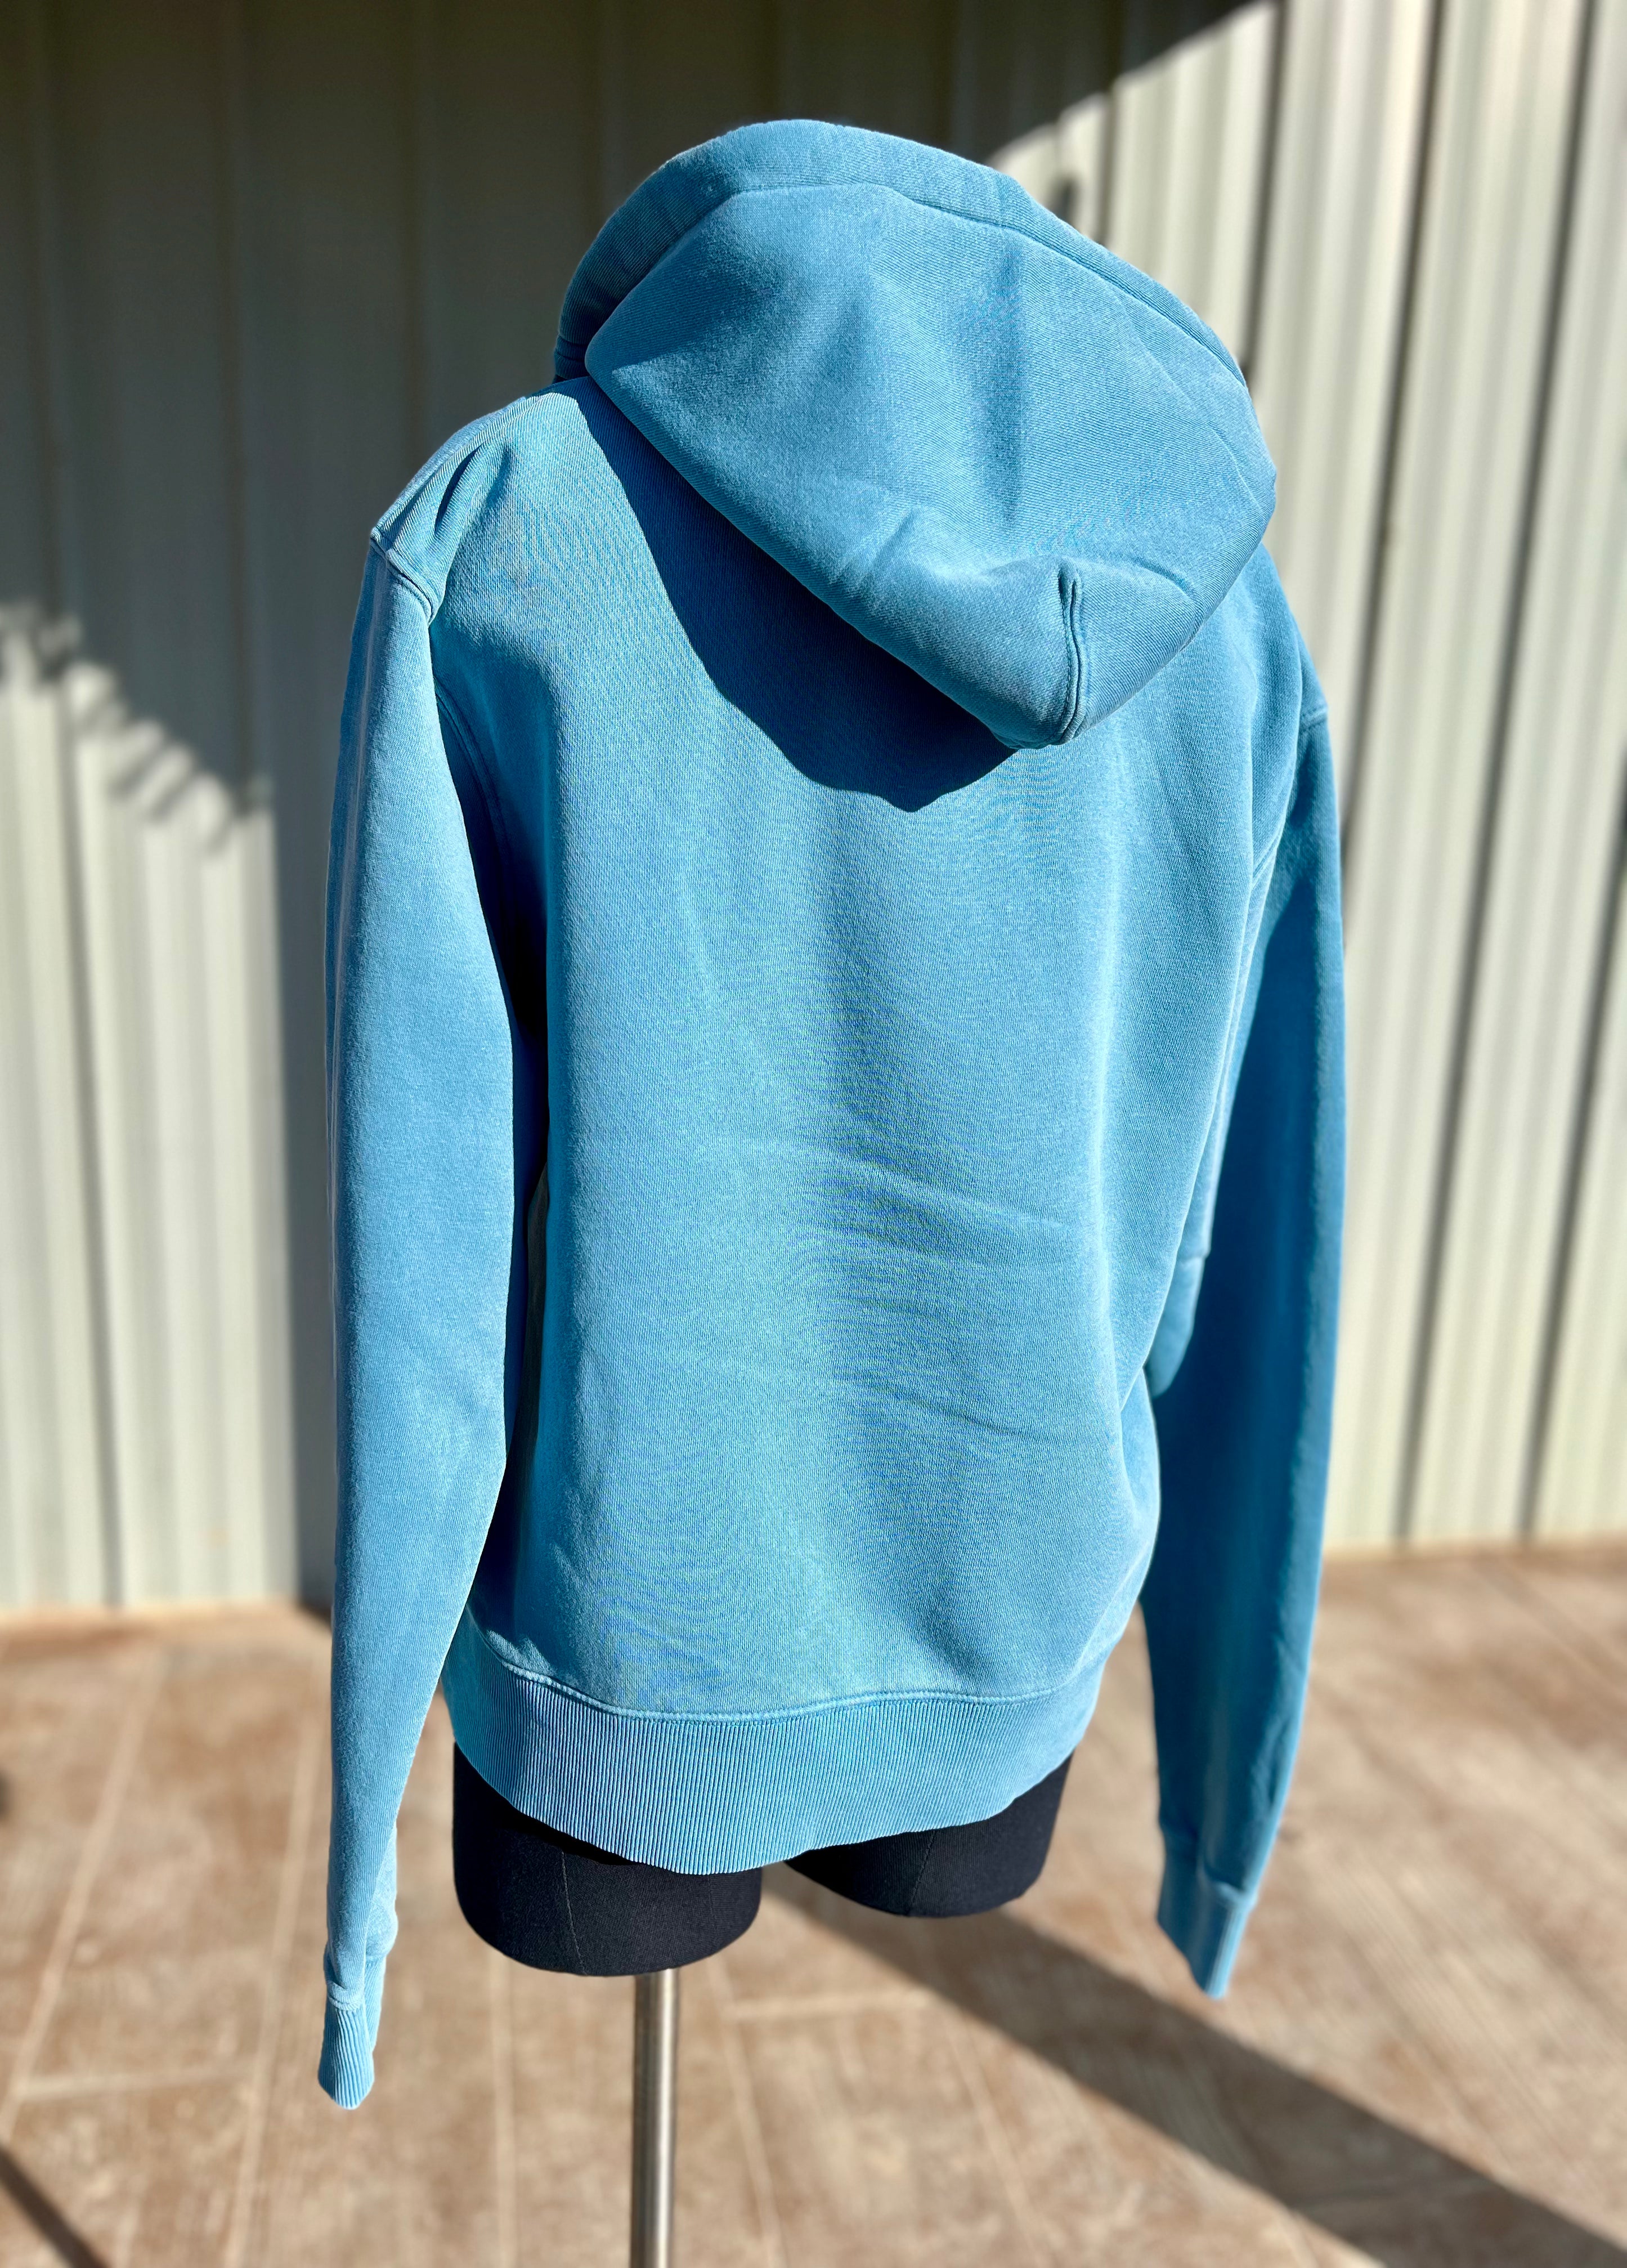 STS Ranchwear Womens Ranch Washed Blue Cotton Blend Hoodie